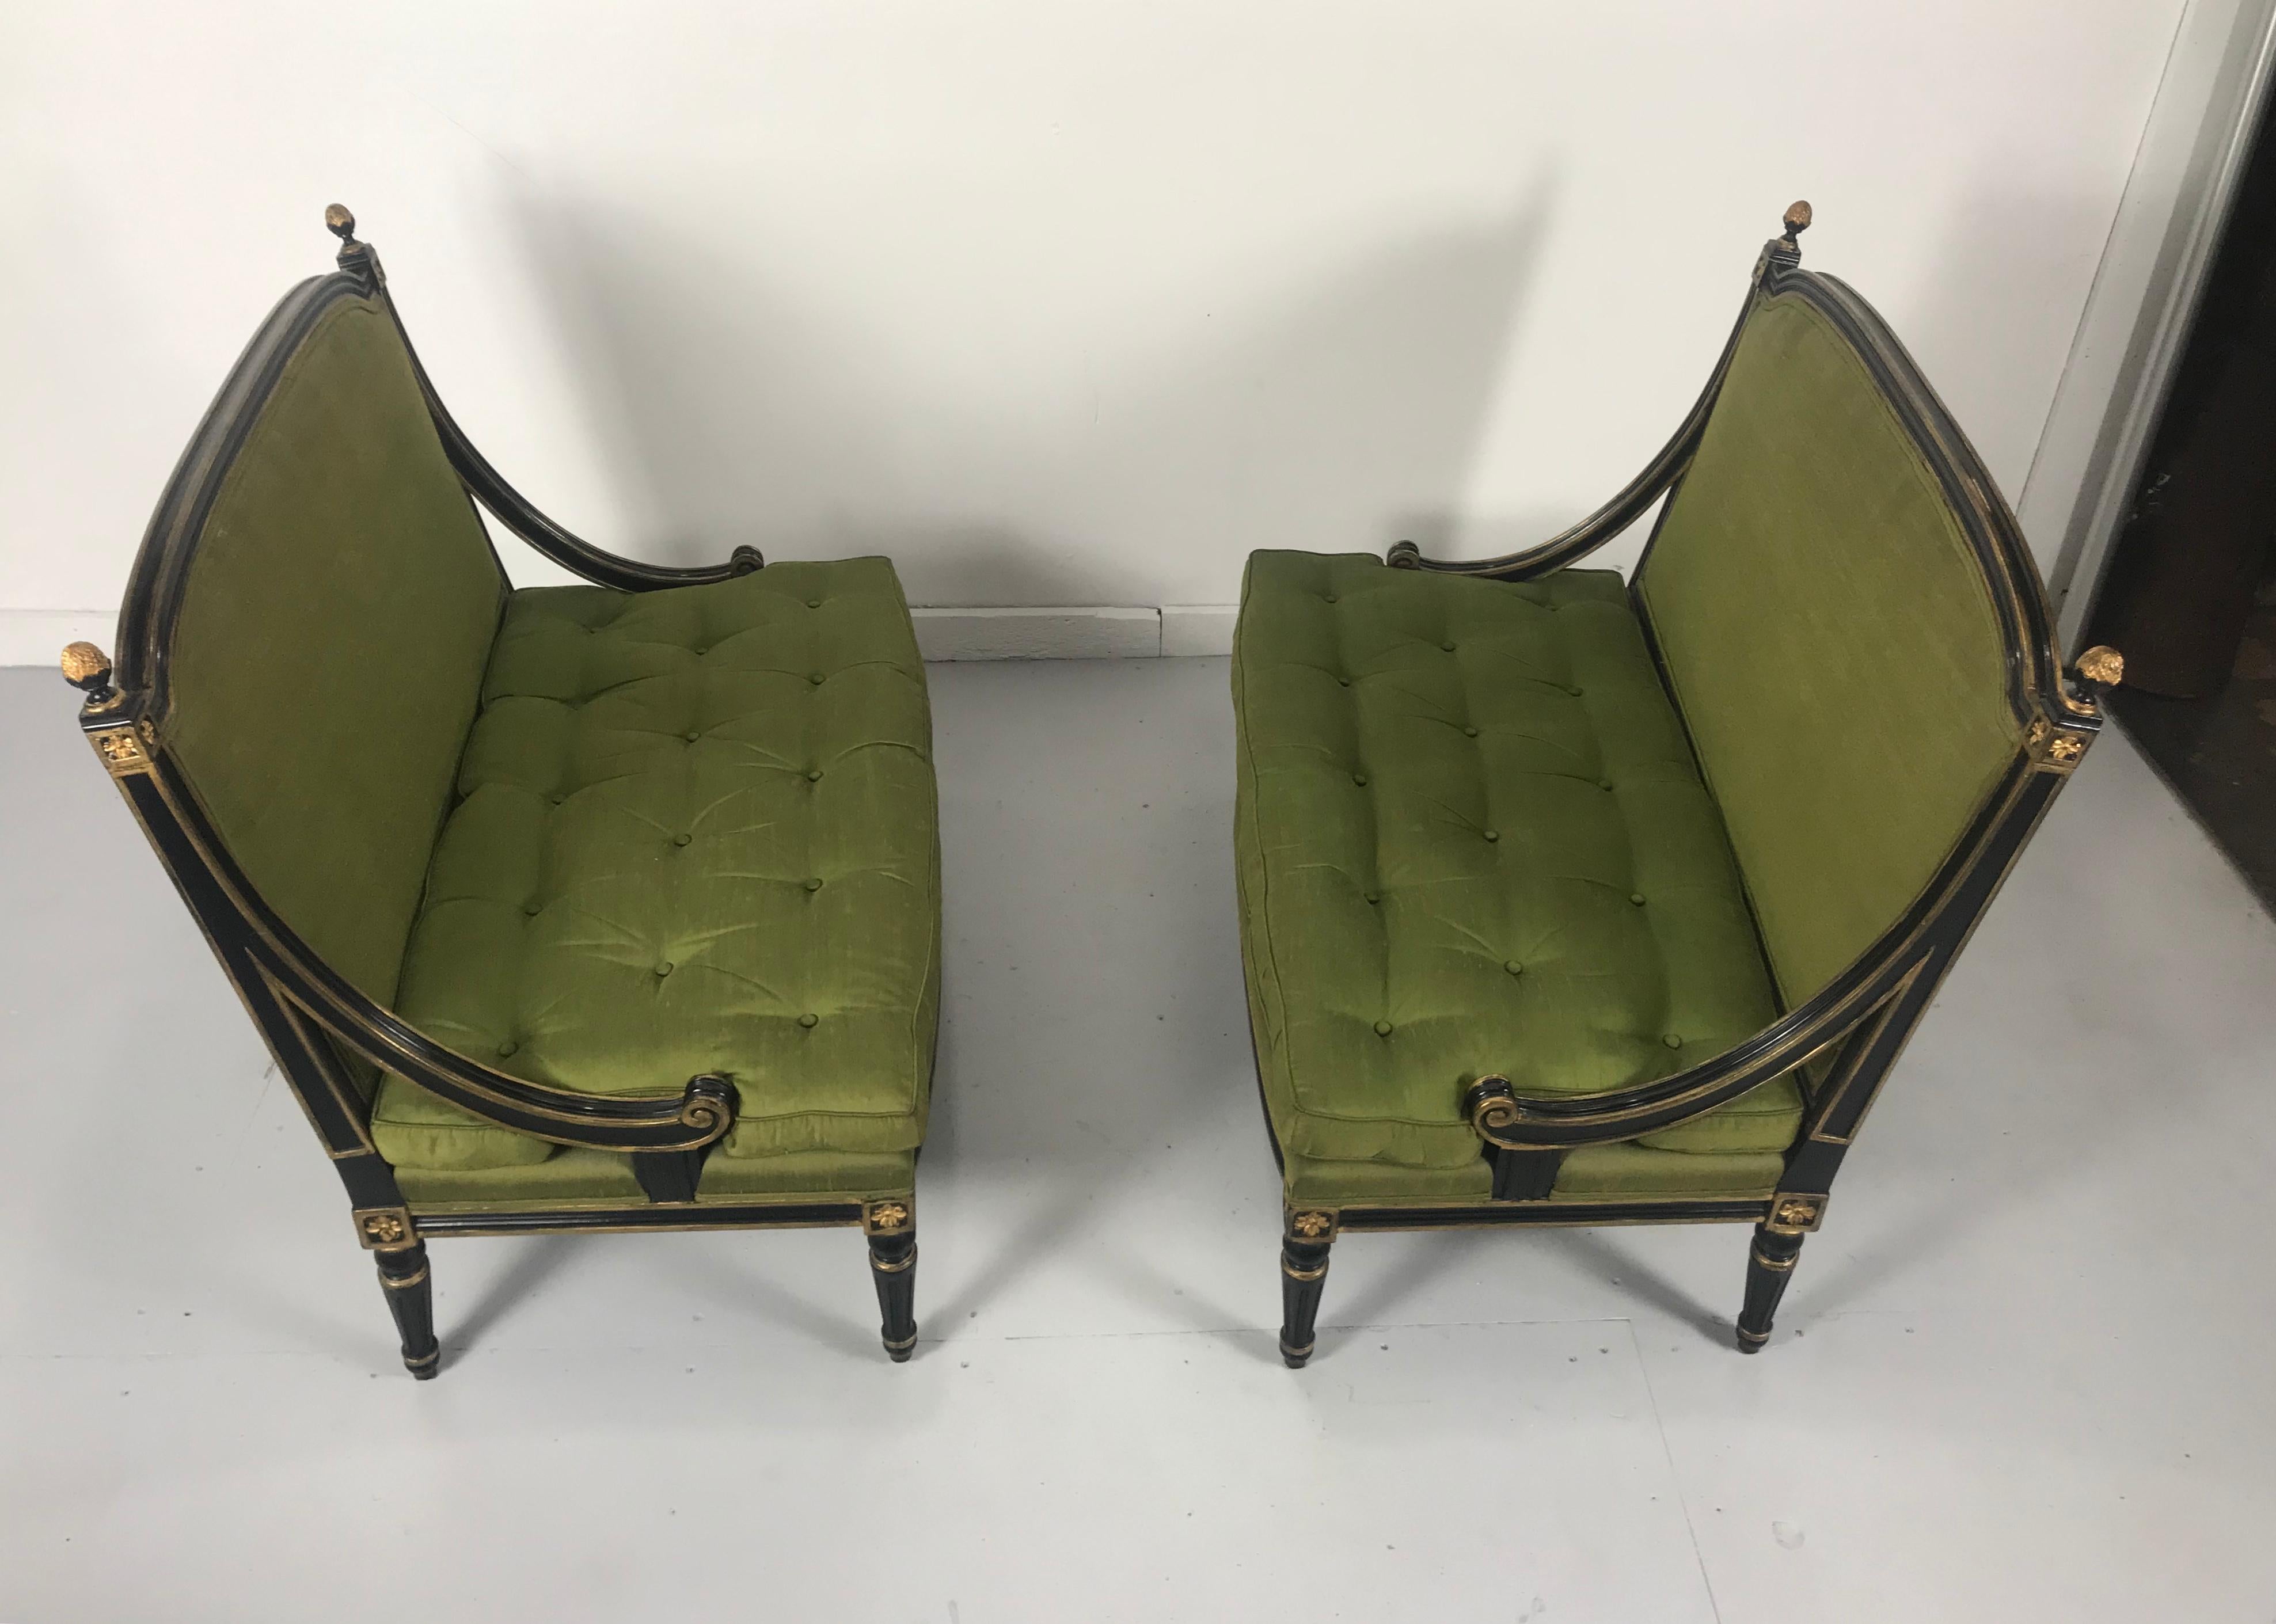 Matched pair Louis XV style Lacquered and gilt Settee's, loveseats, stunning, retain original moss green silk fabric. Superior quality and construction. Attributed to Baker Furniture. Measures: Arm height 15.5.